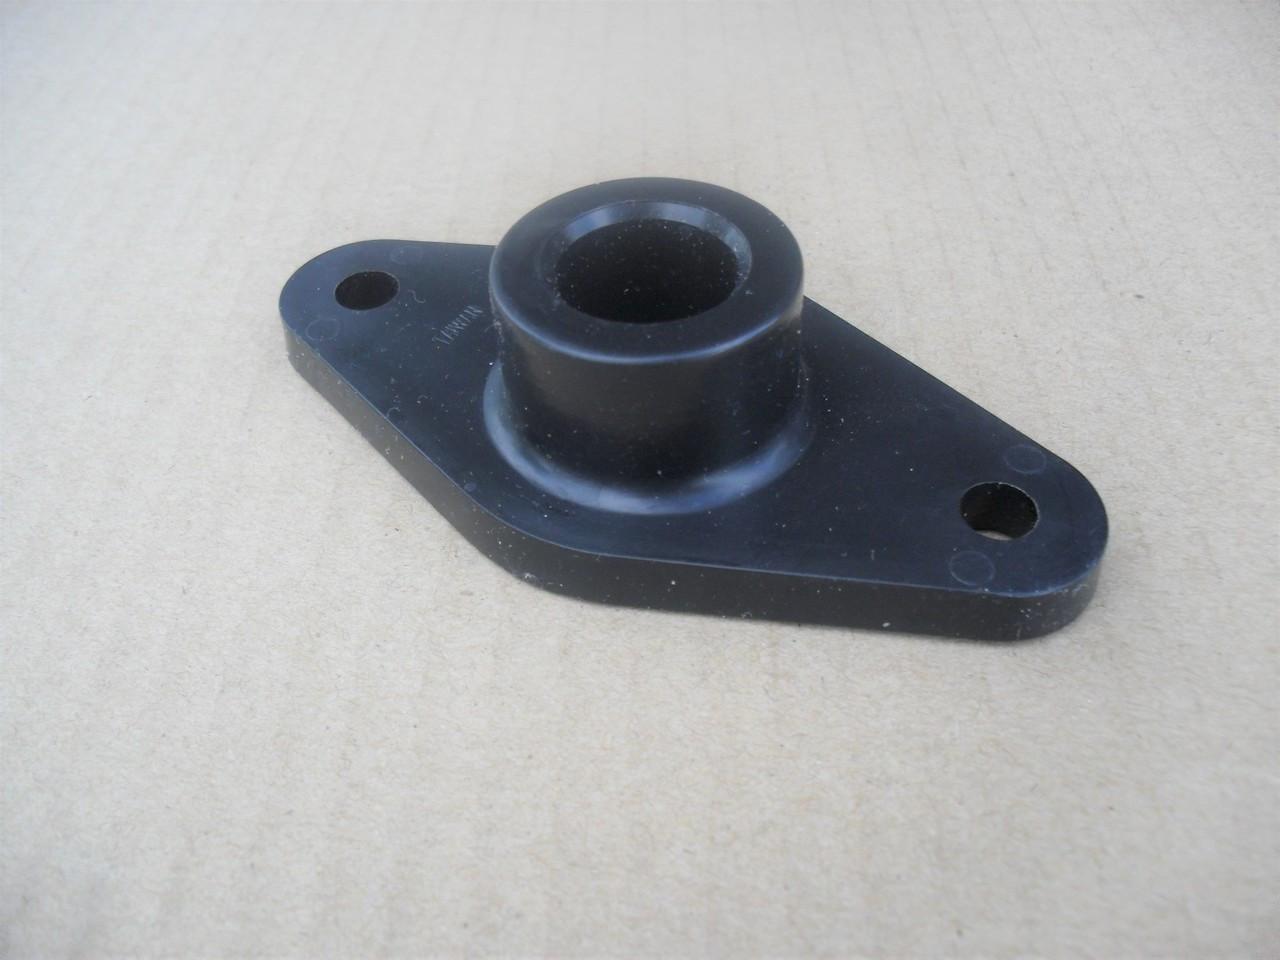 Auger Bushing Bearing for Murray 577023, 577023MA Snowblower, snowthrower, snow blower thrower